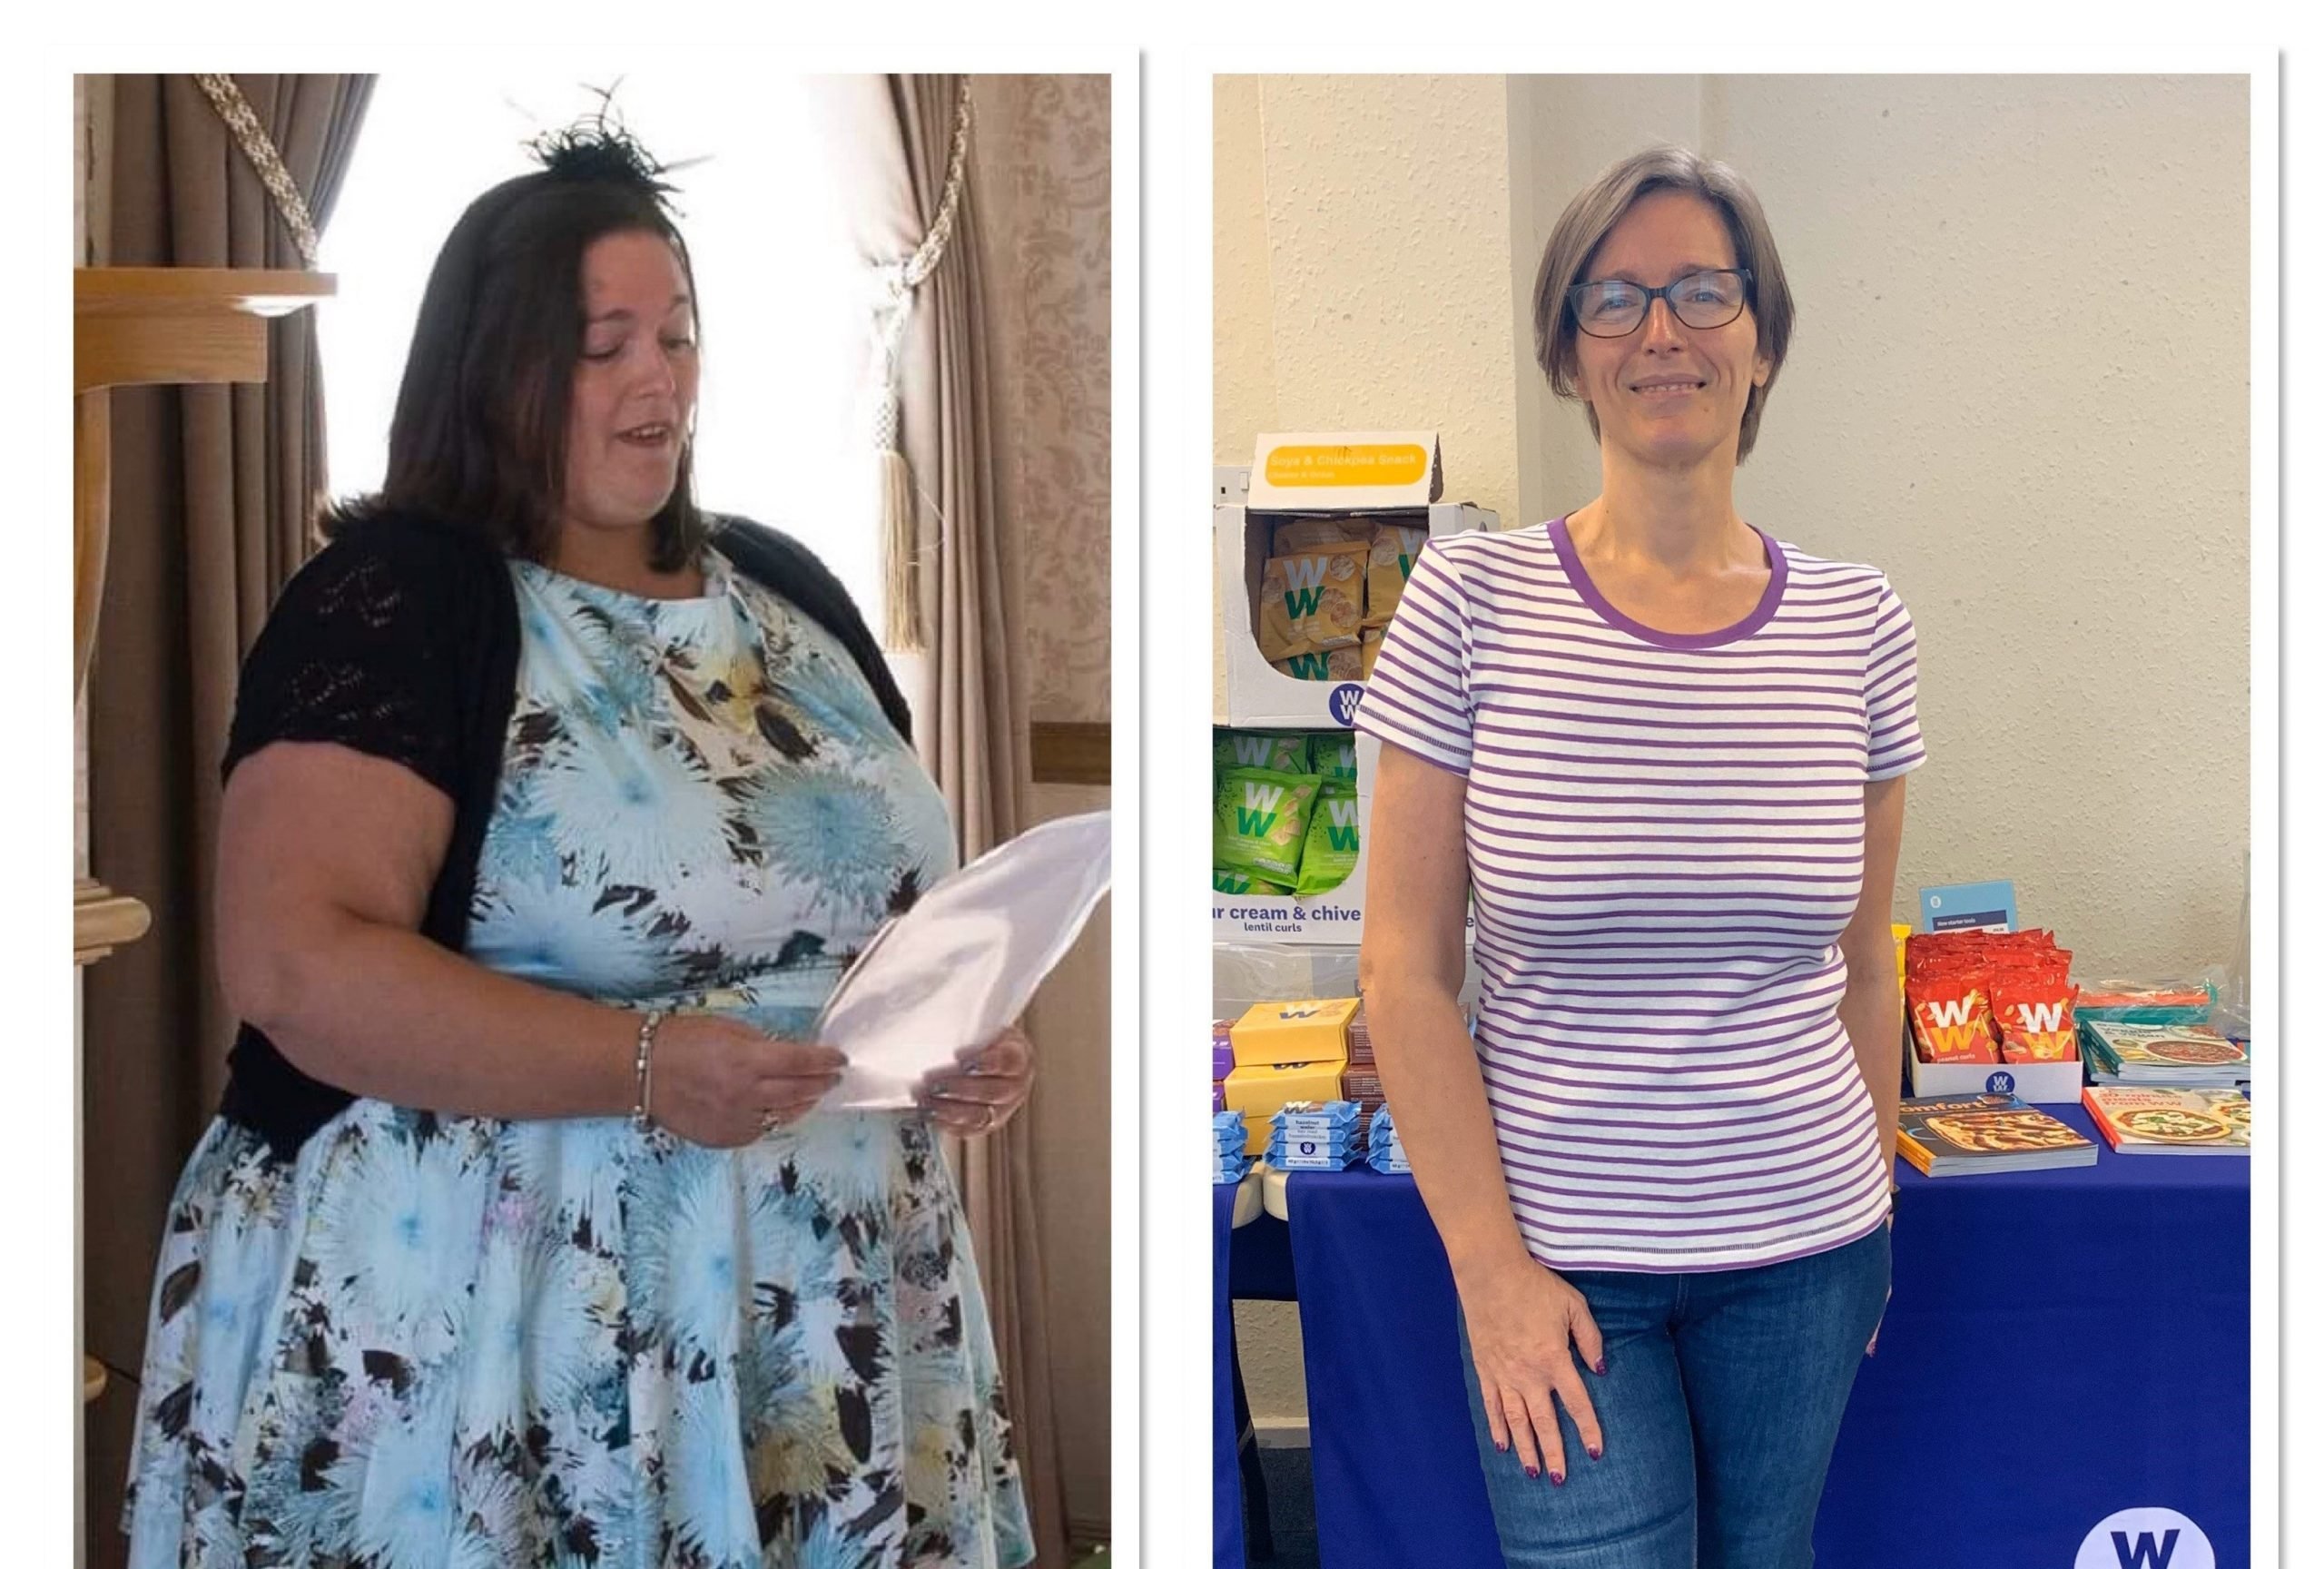 Wendy Dougal slimming world weight loss transformation